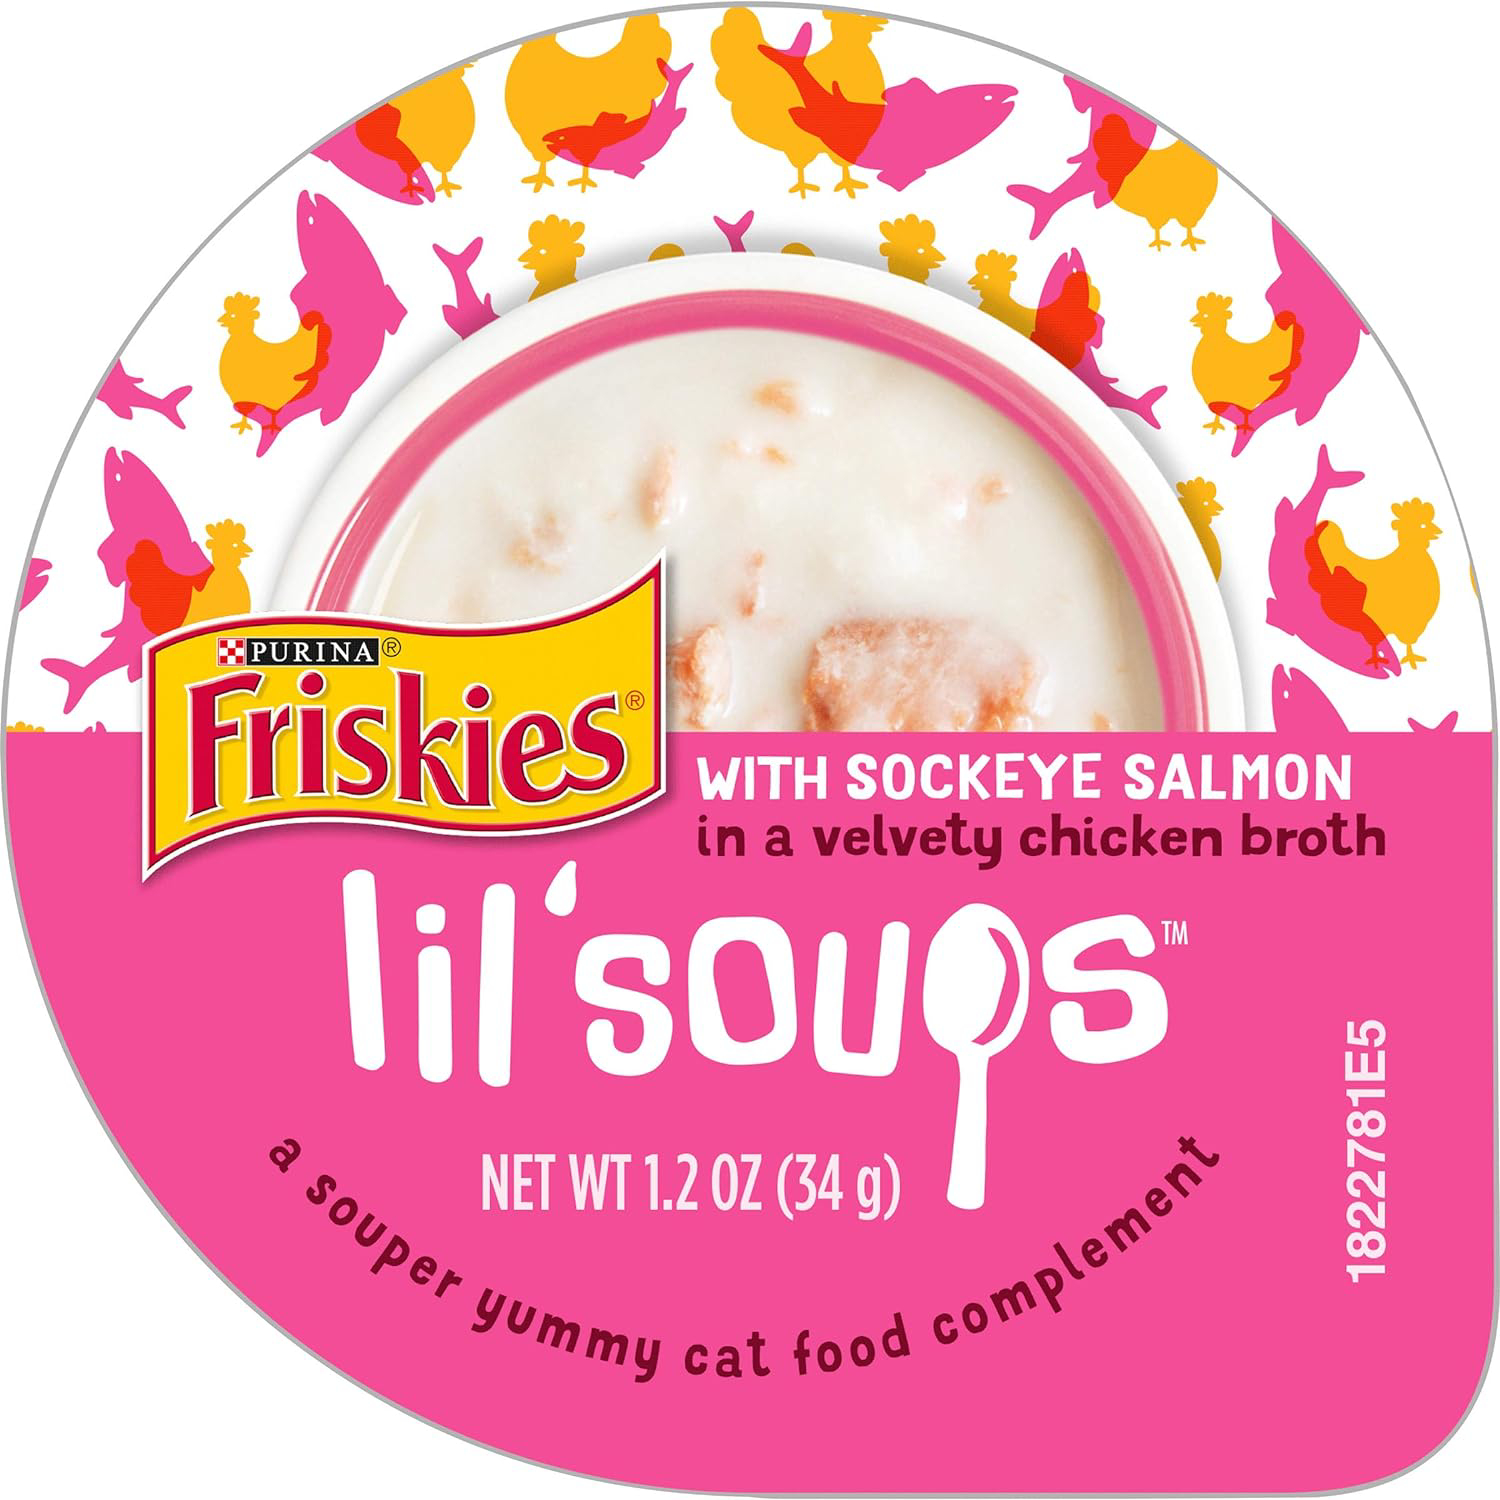 Purina Friskies Natural, Grain Free Wet Cat Food Lickable Cat Treats, Lil_ Soups With Sockeye Salmon in Chicken Broth - (Pack of 8) 1.2 oz. Cups New